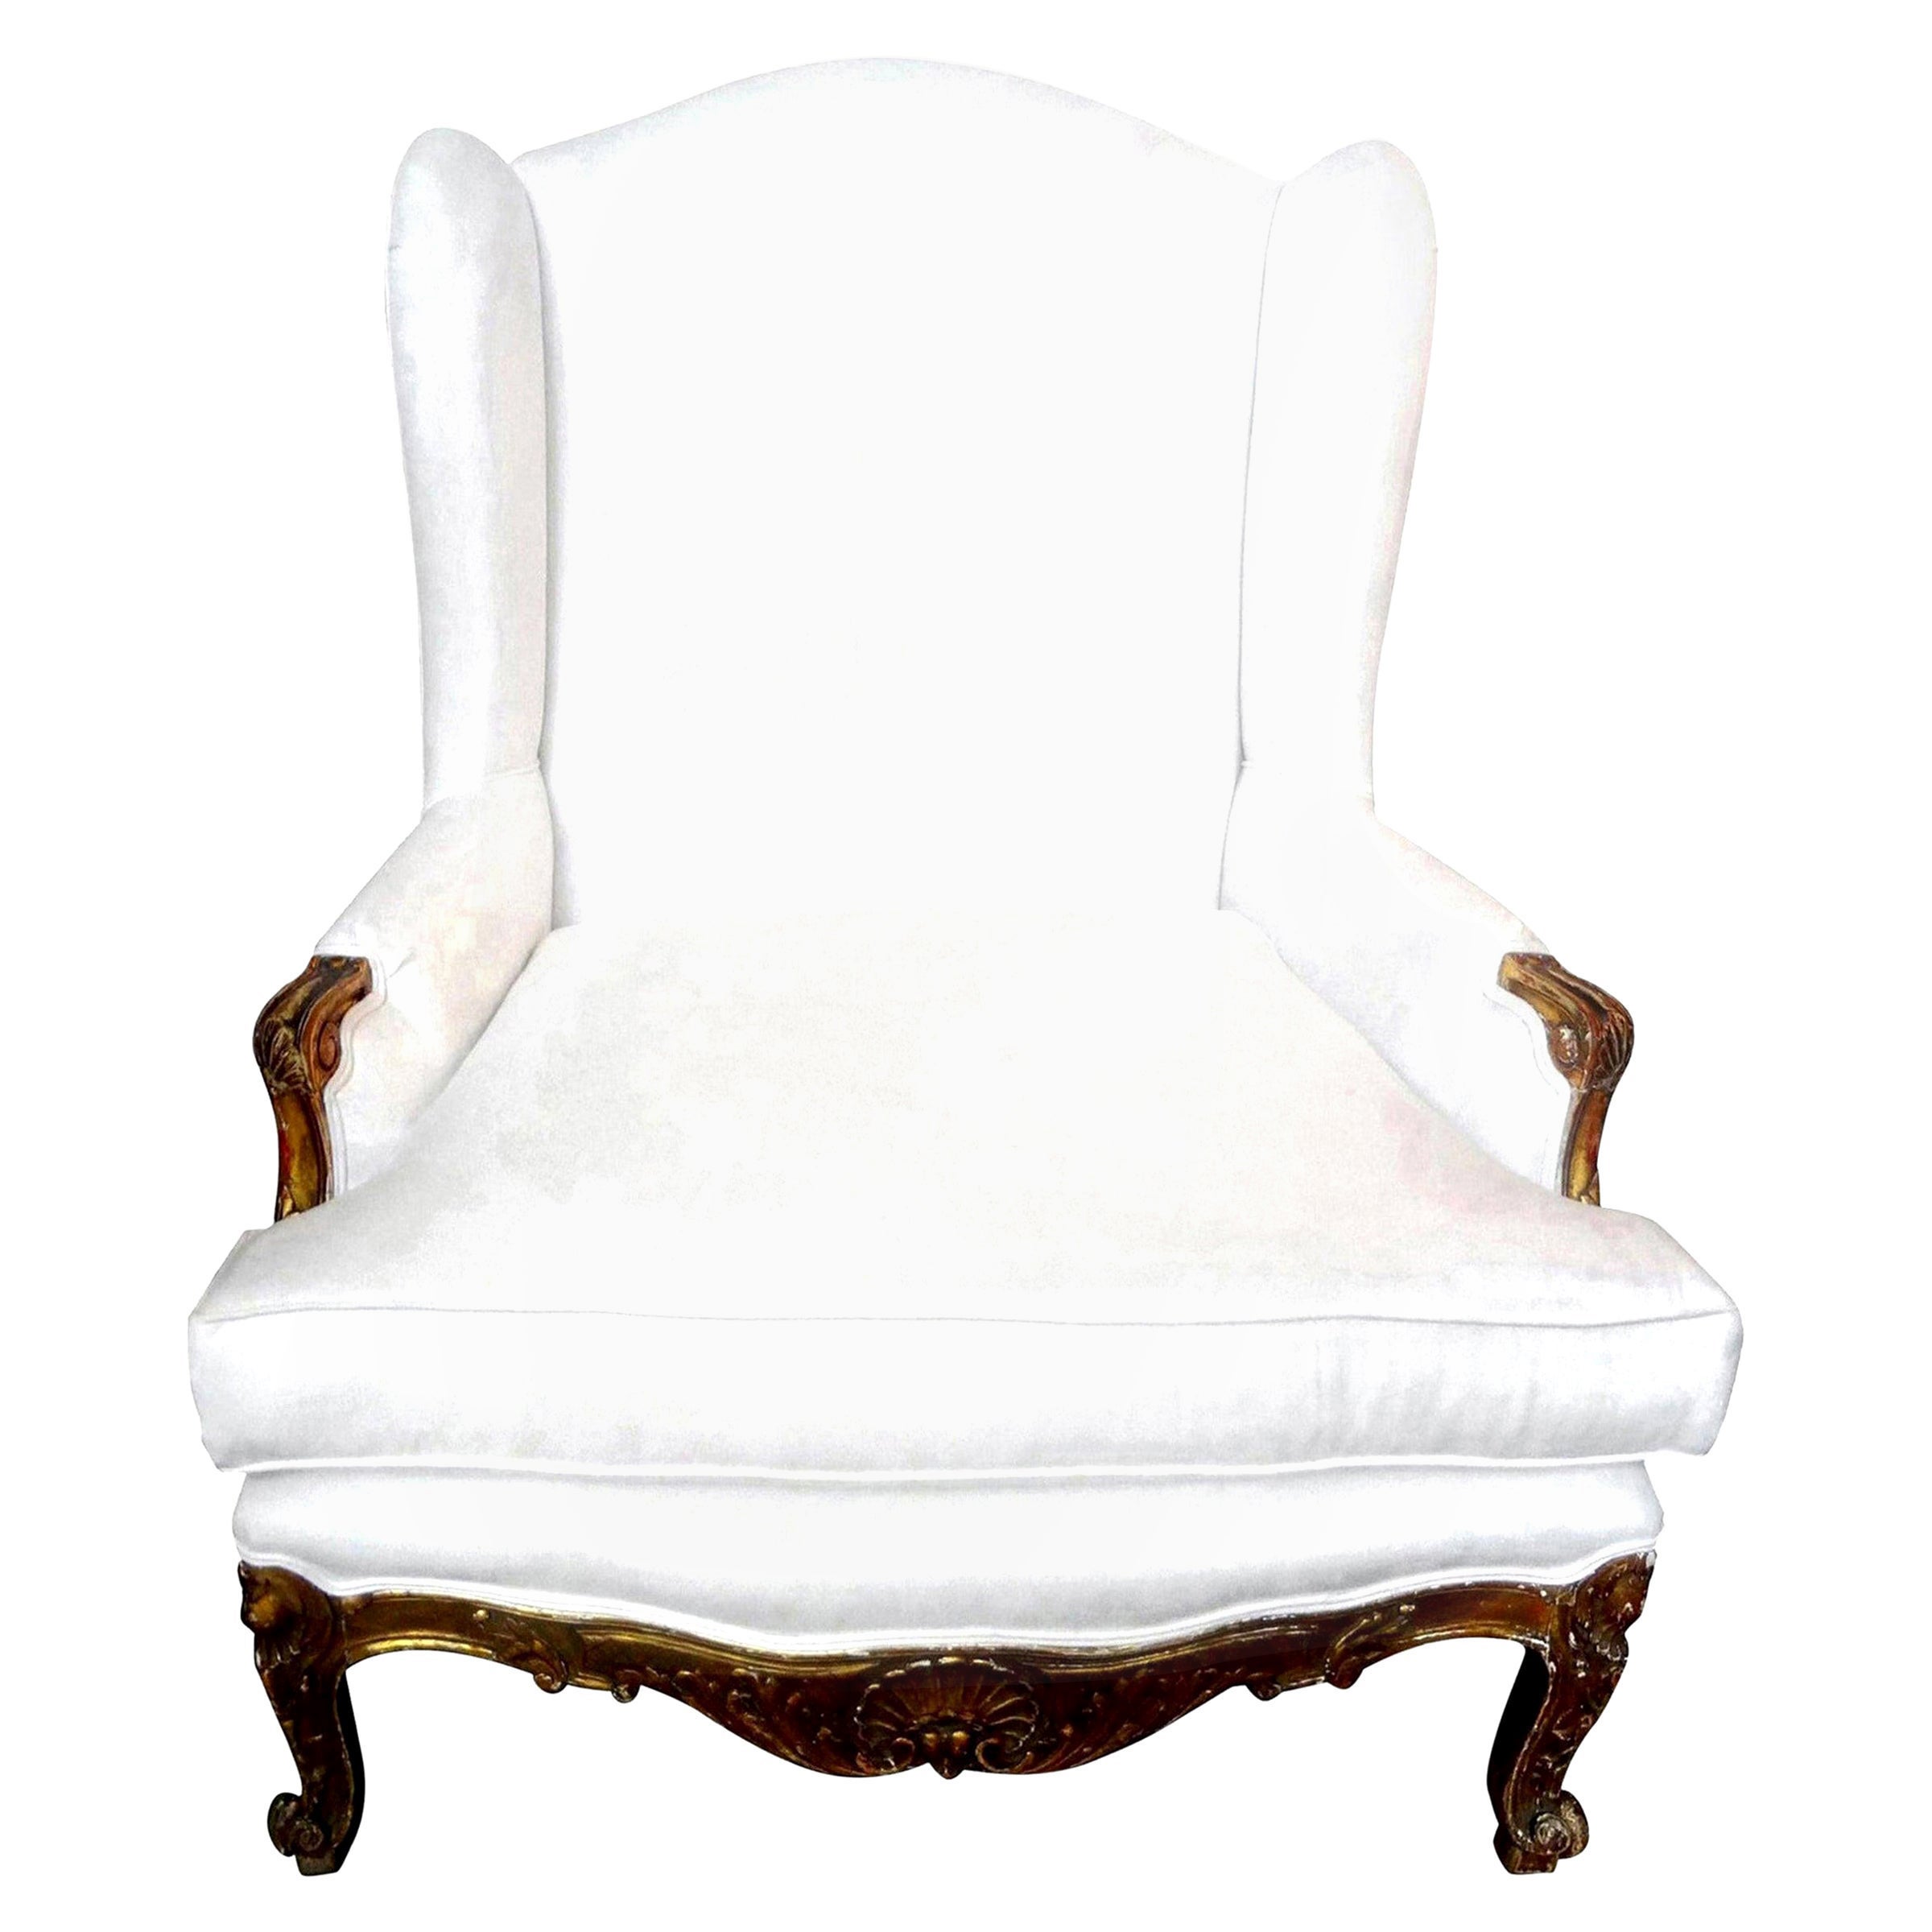 19th Century French Regence Giltwood Marquise Chair For Sale